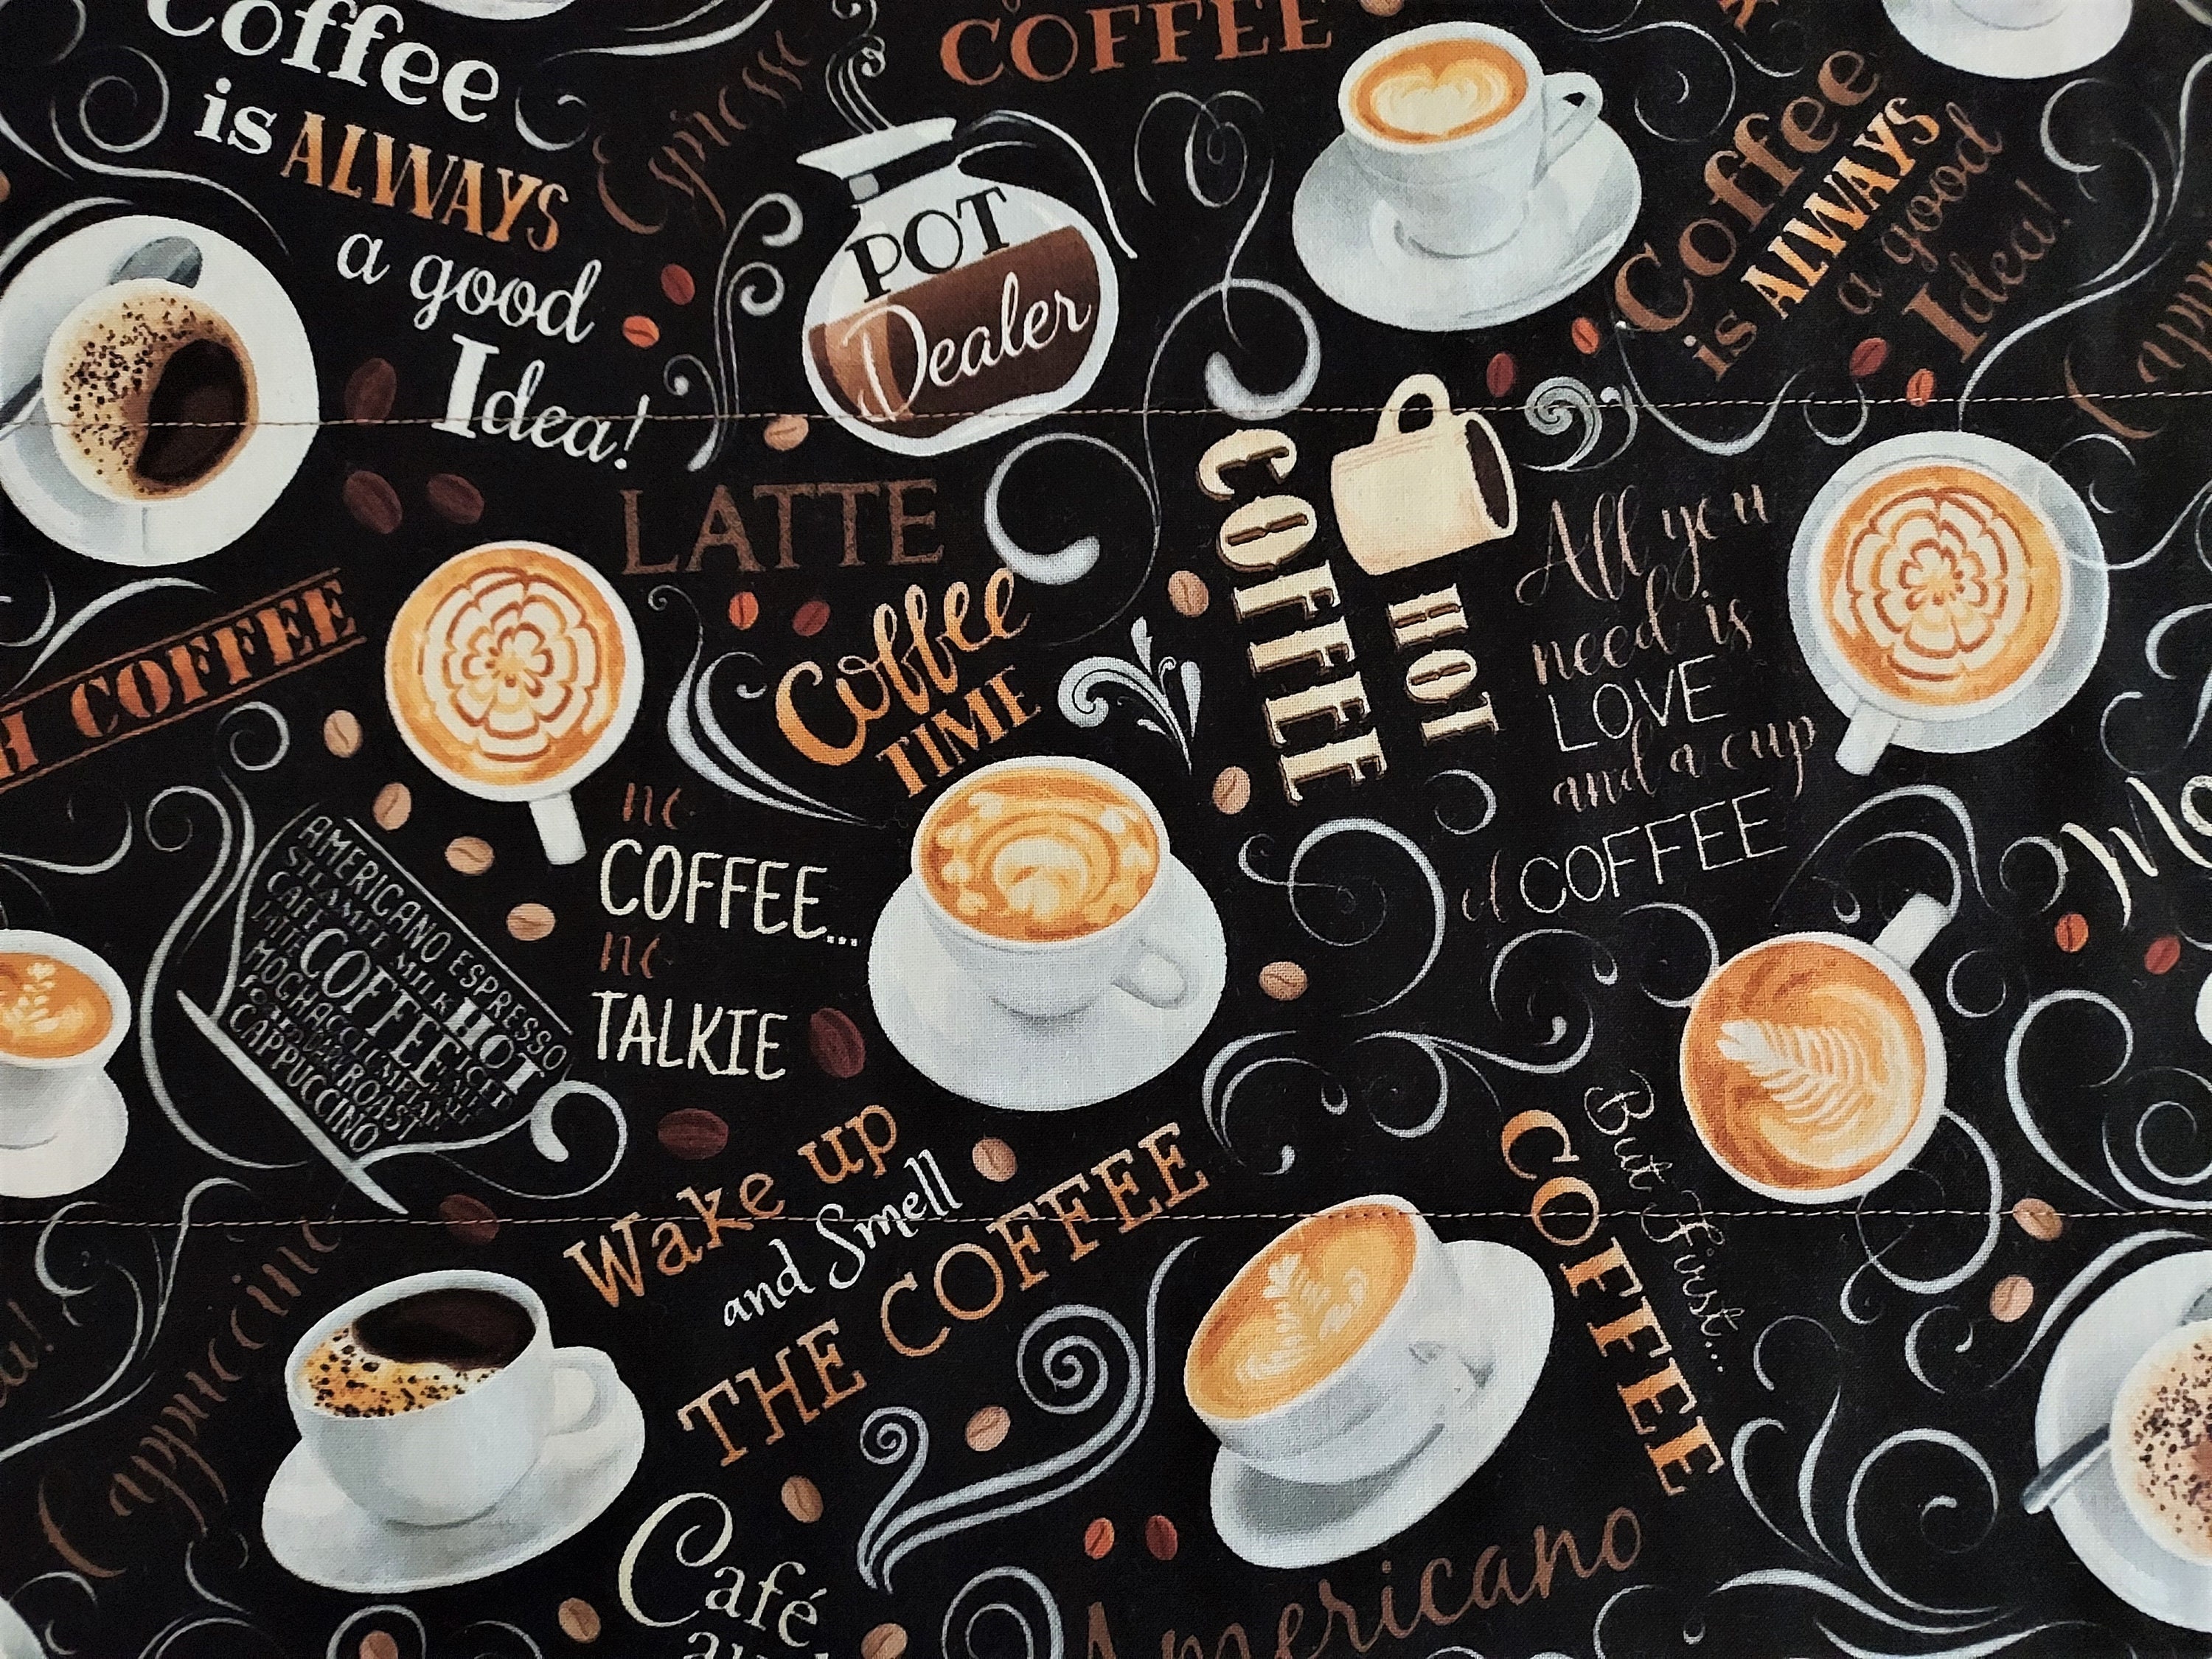 Custom Coffee Maker Mat, Cute Retro Coffee Cup Washable Placemat for your Coffee  Maker or Espresso Machine, Coffee Bar Decor Accessories